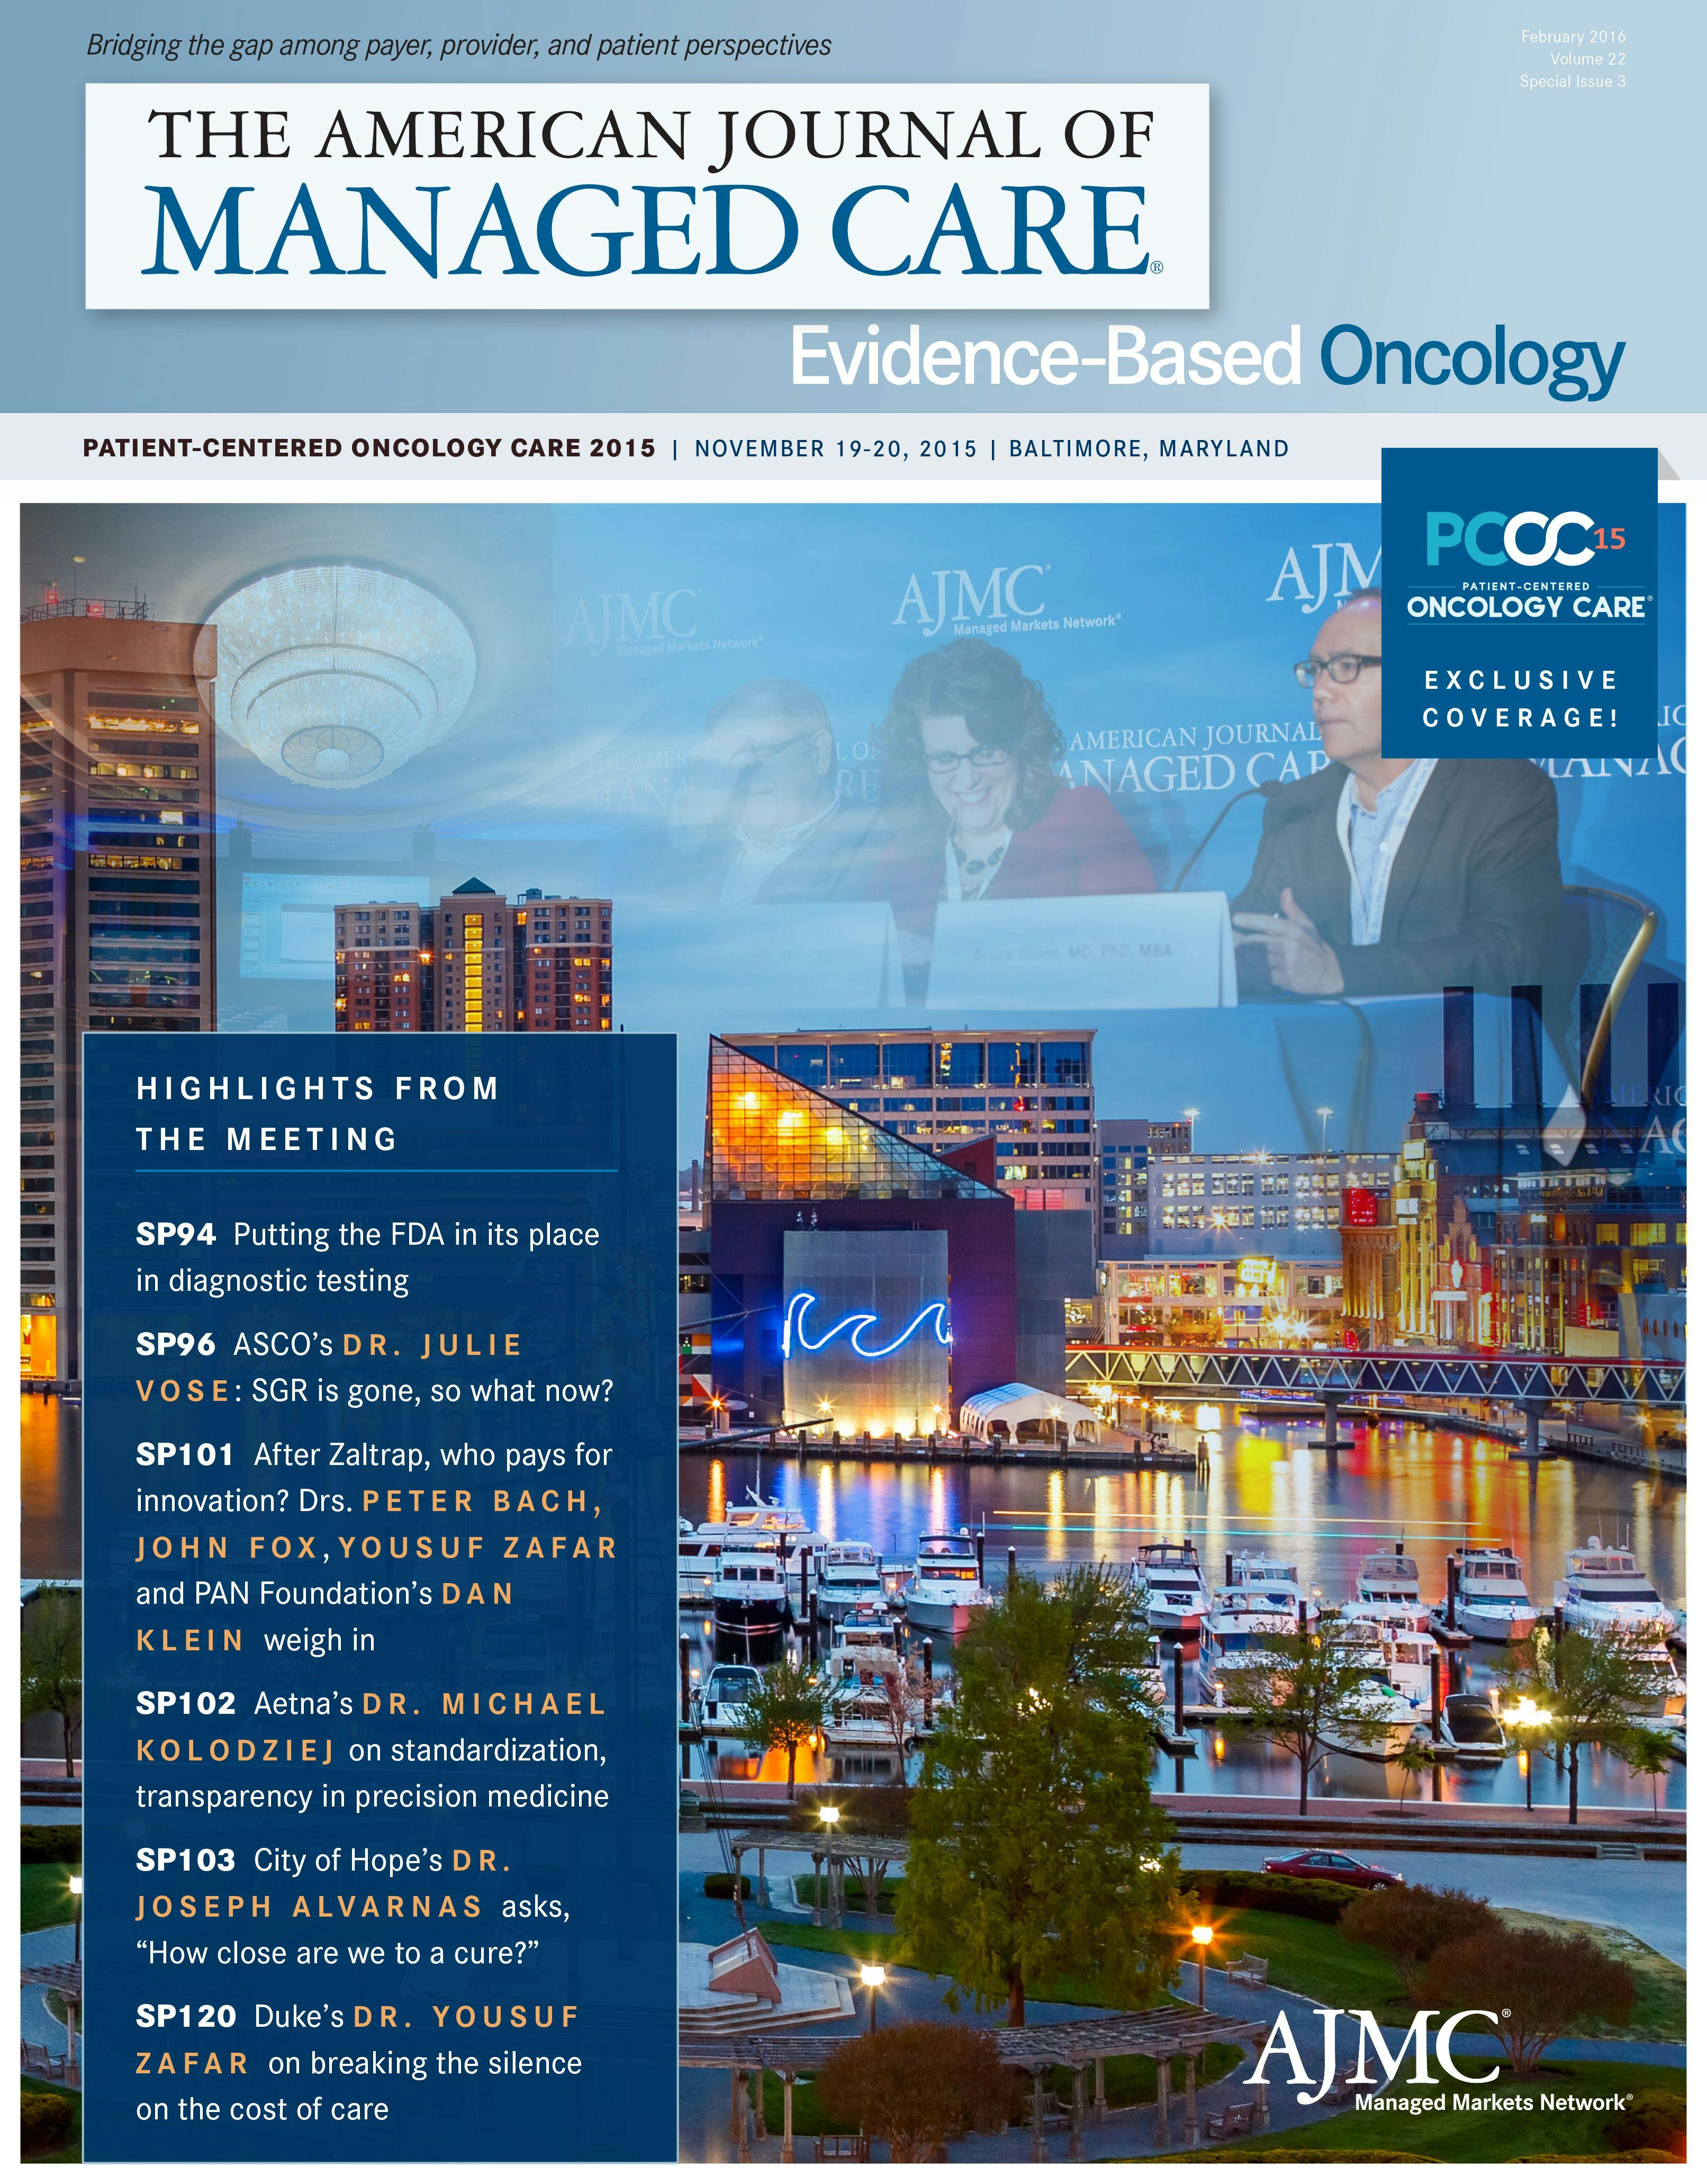 Patient-Centered Oncology Care 2015